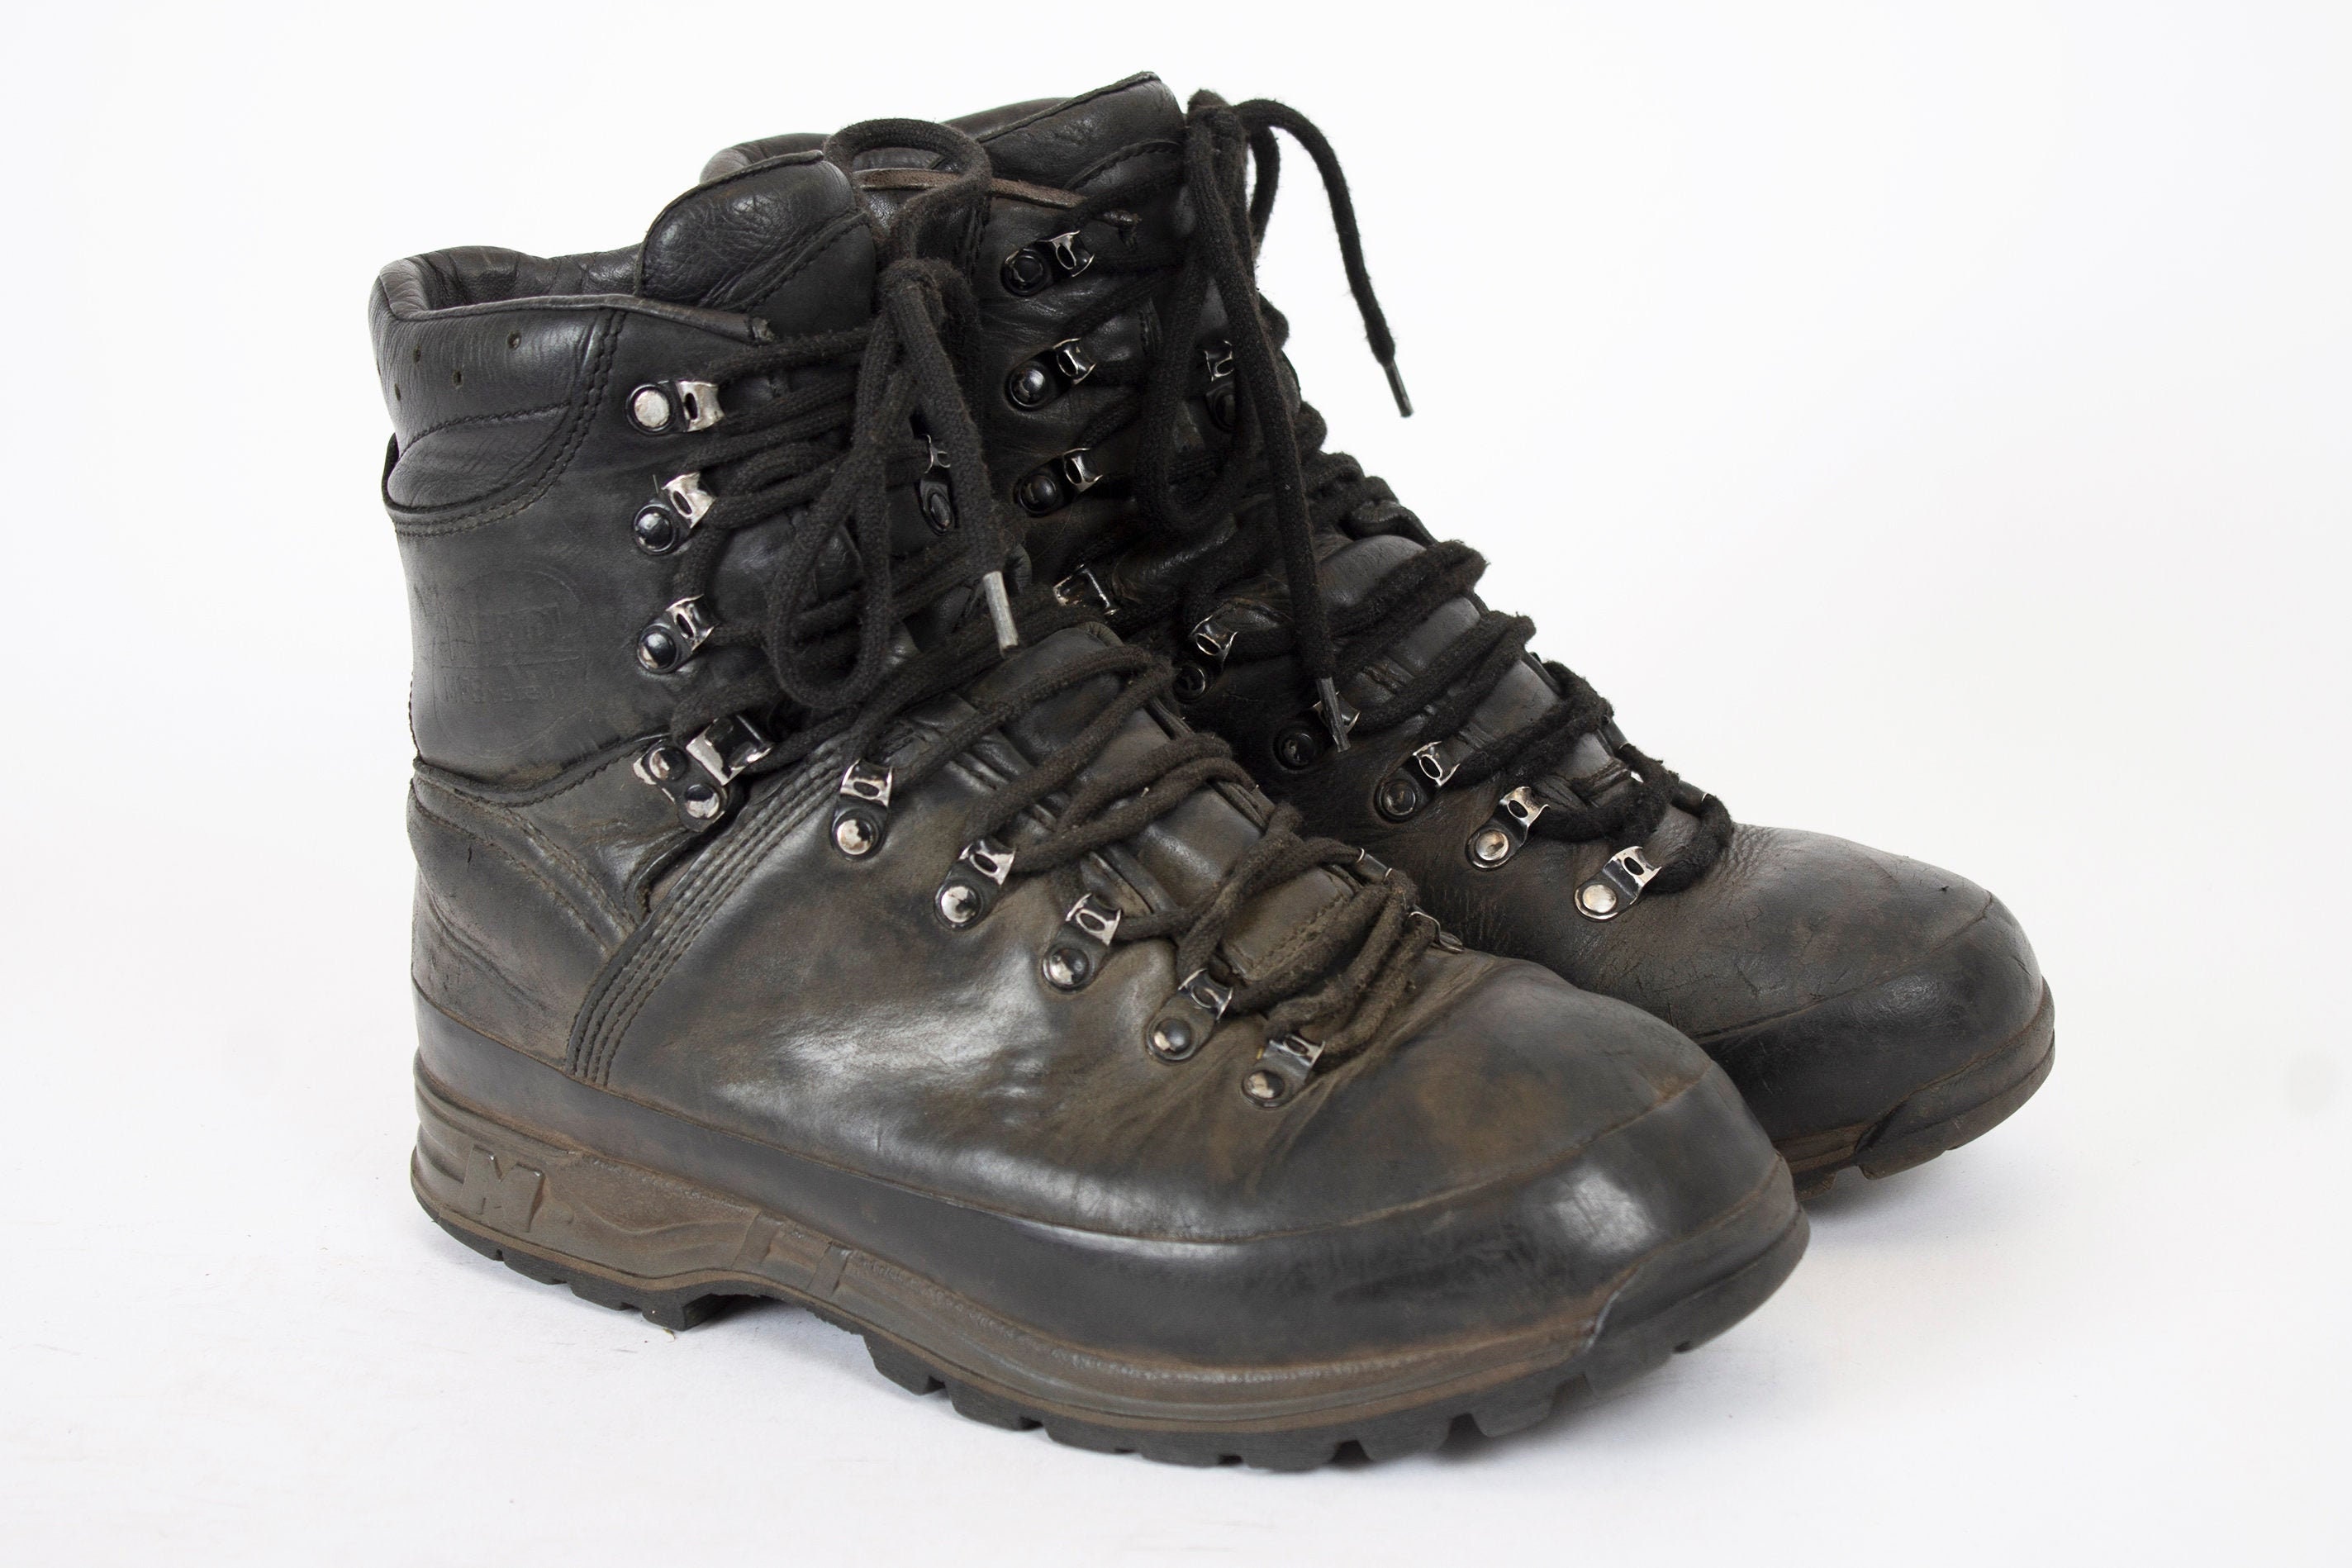 Mainstream pijp plannen US10.5 Black Army Meindl Military-grade M1 Army Issued Boots - Etsy